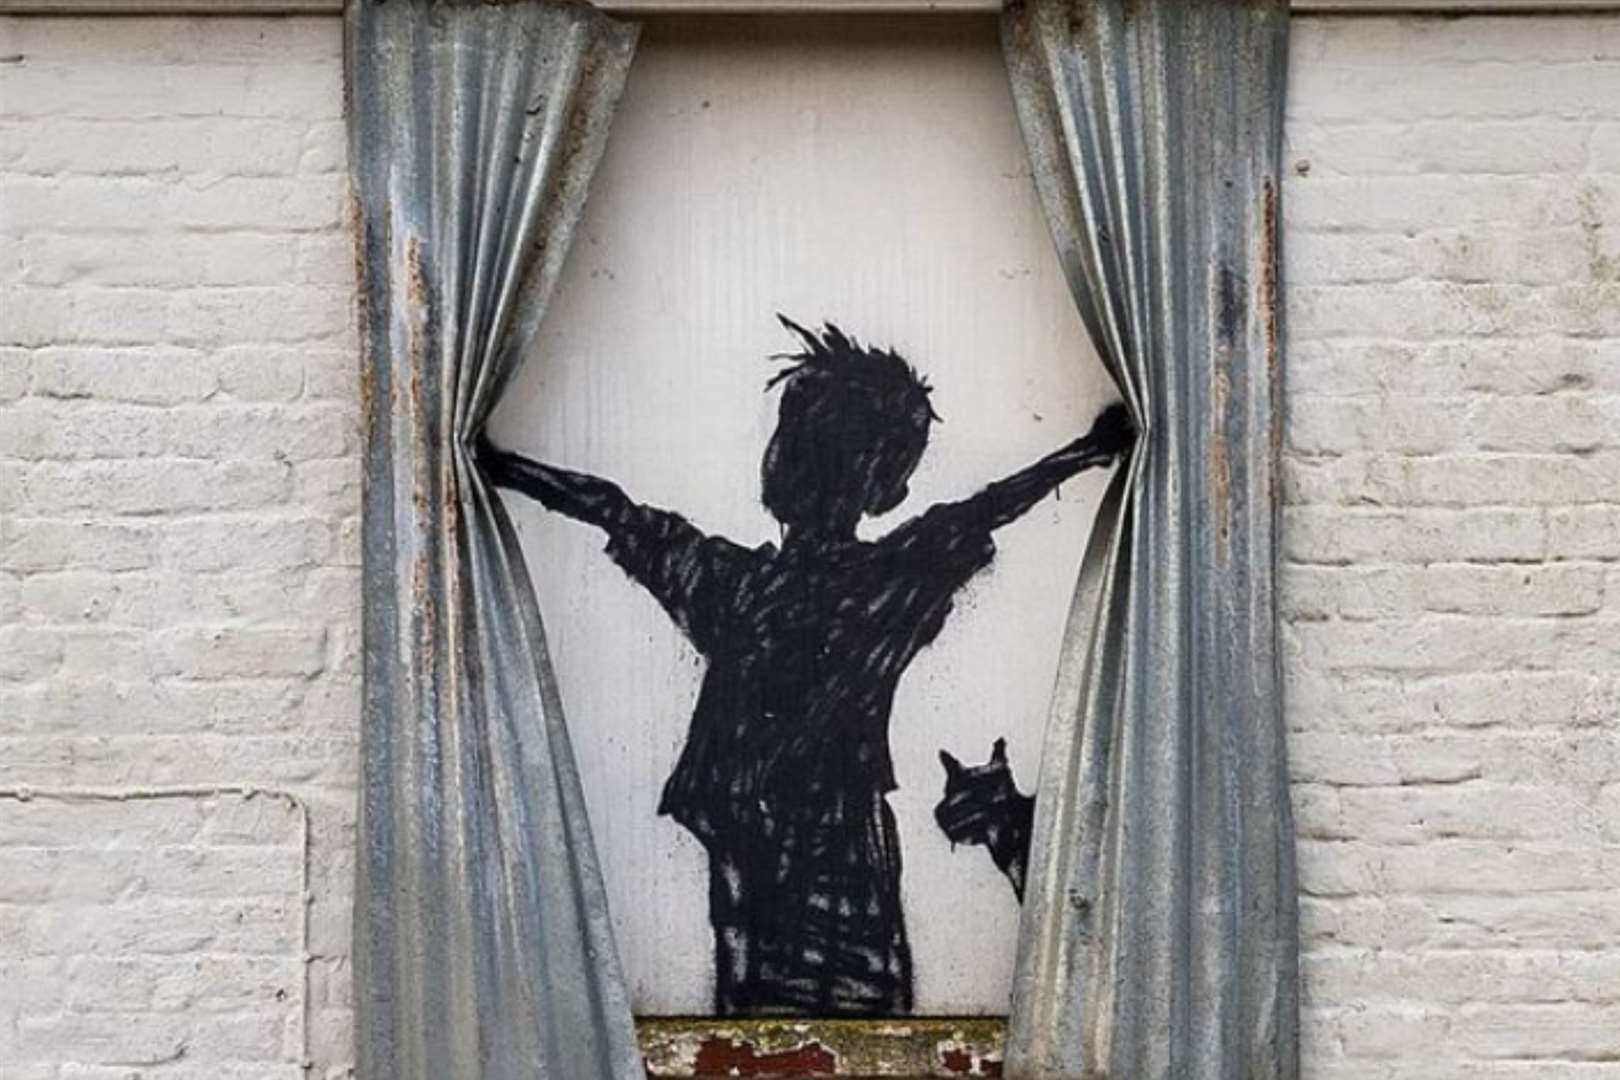 The Herne Bay Banksy shows a boy opening the curtains inside a house. Picture: Banksy/Instagram